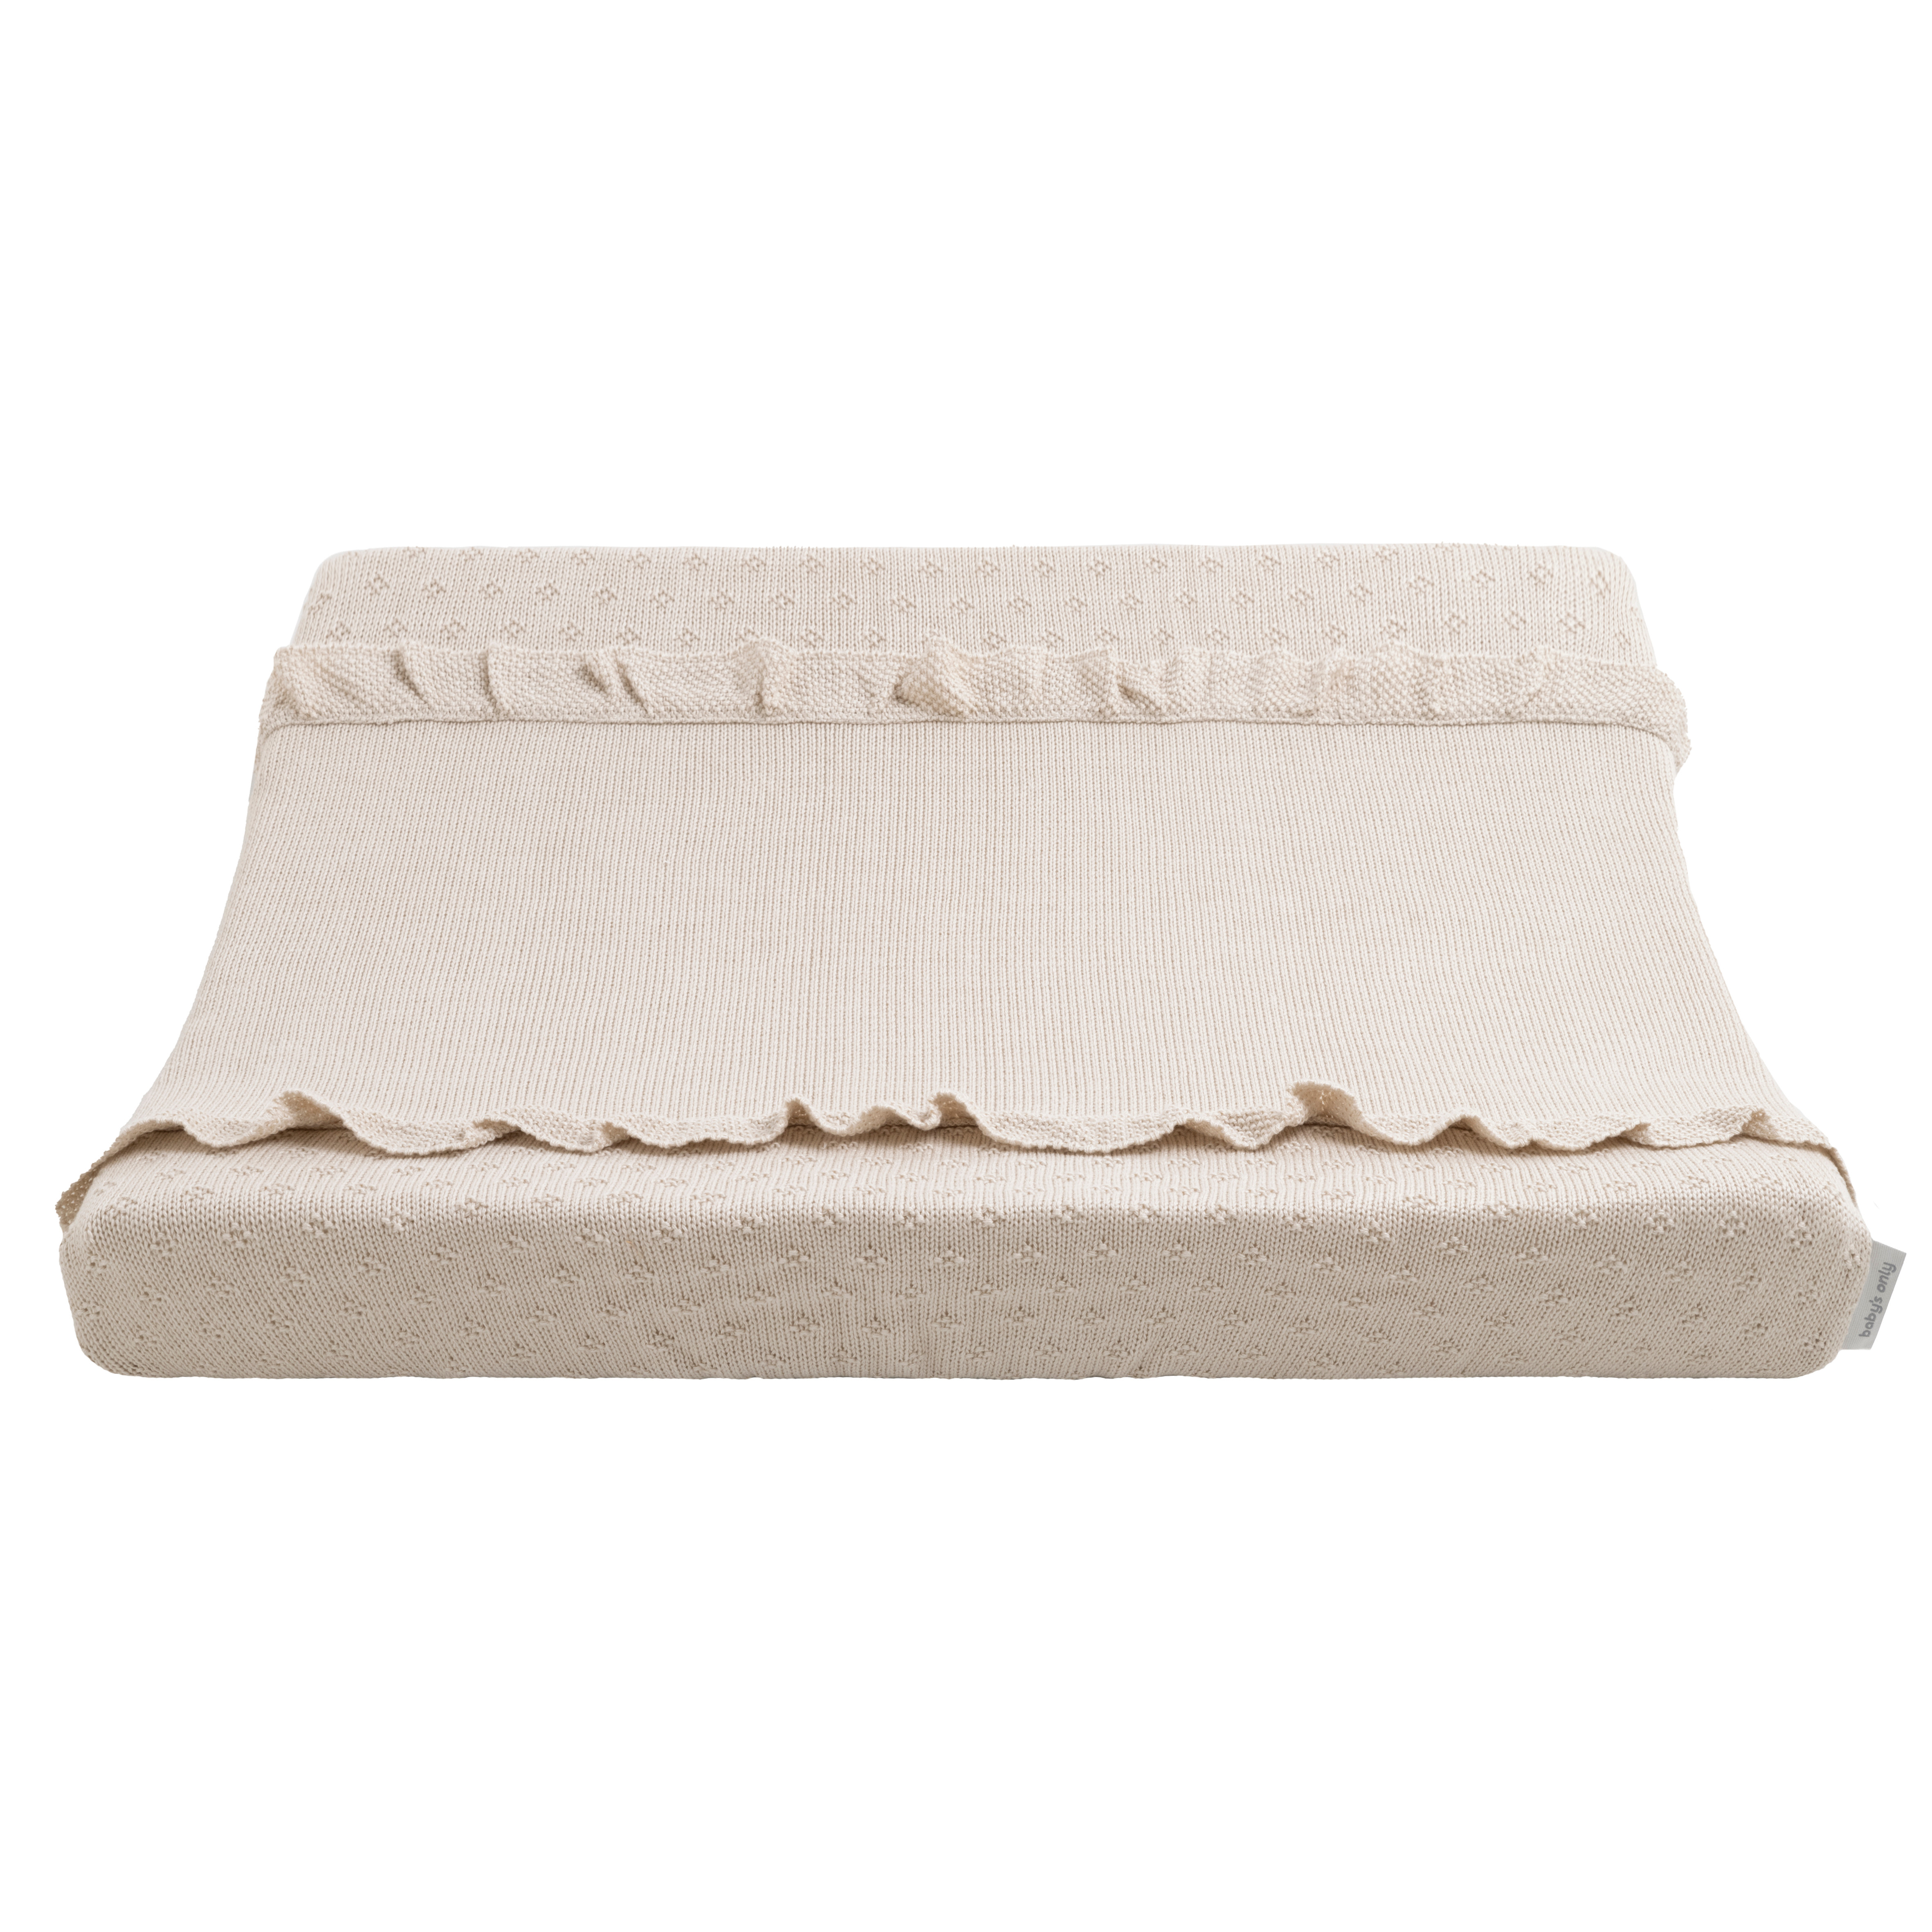 Changing pad cover Mood warm linen - 45x70